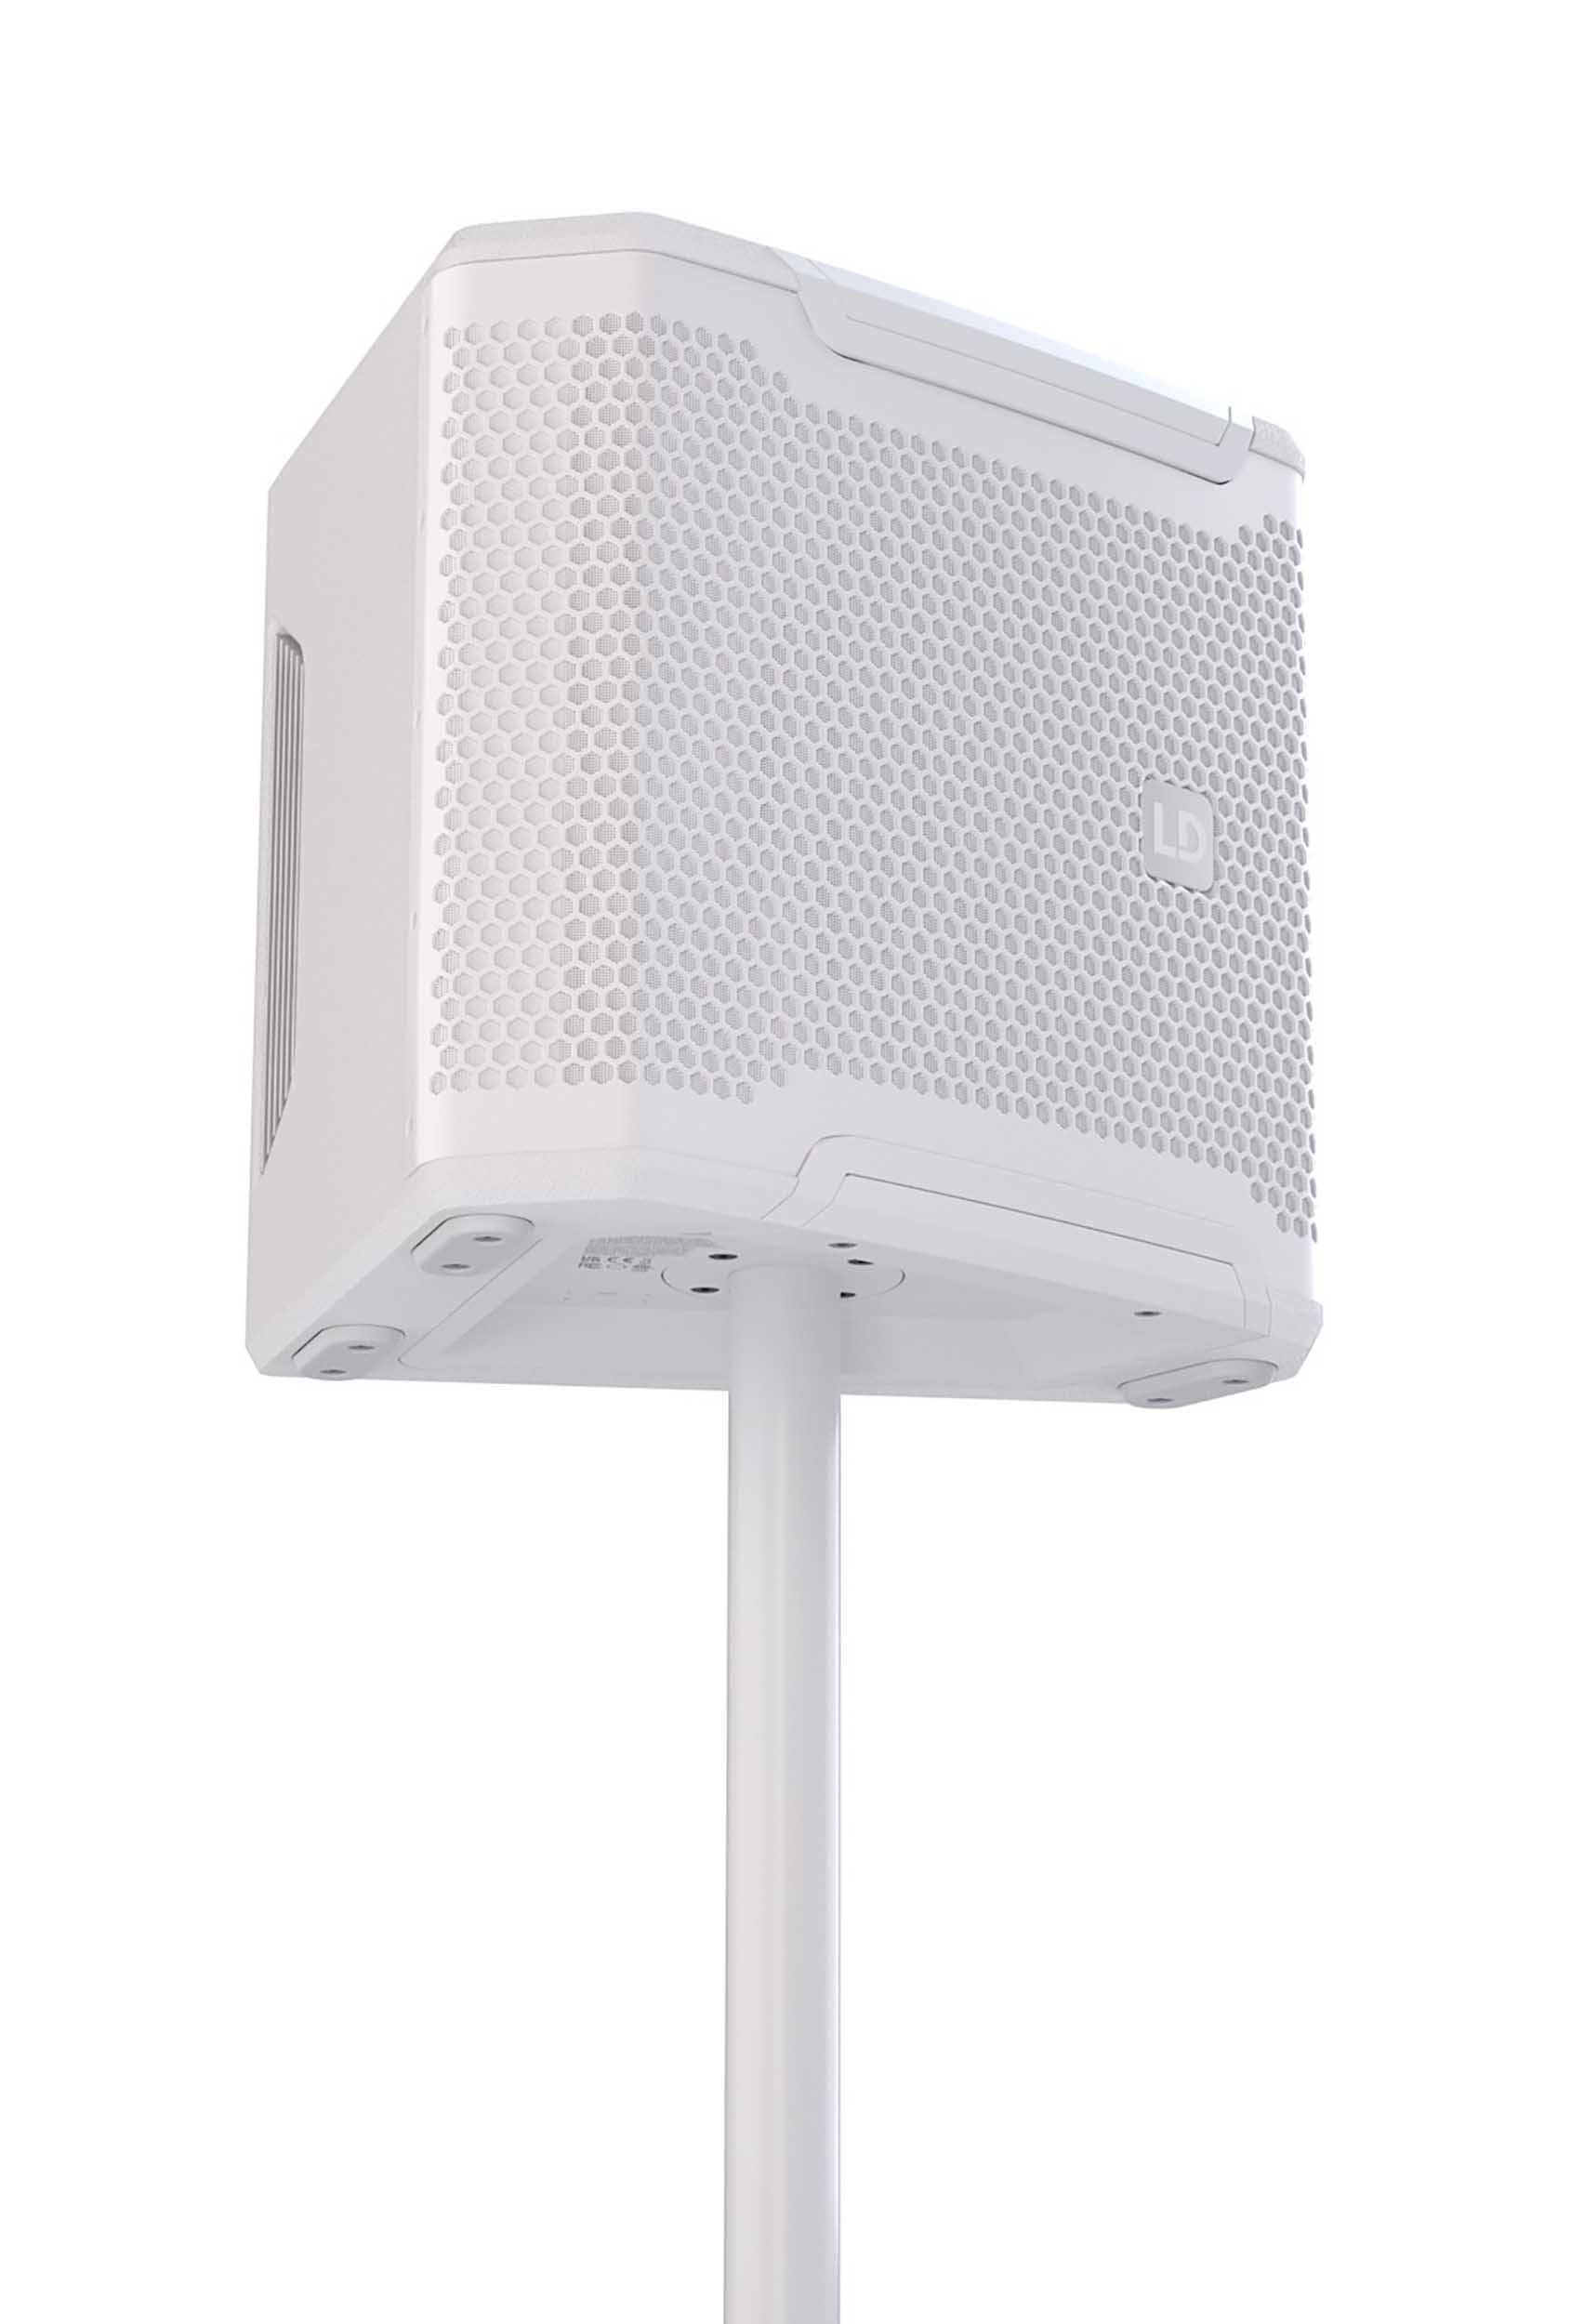 LD System LDS-MON8AG3W, 8" Powered Coaxial Stage Monitor - White by LD Systems